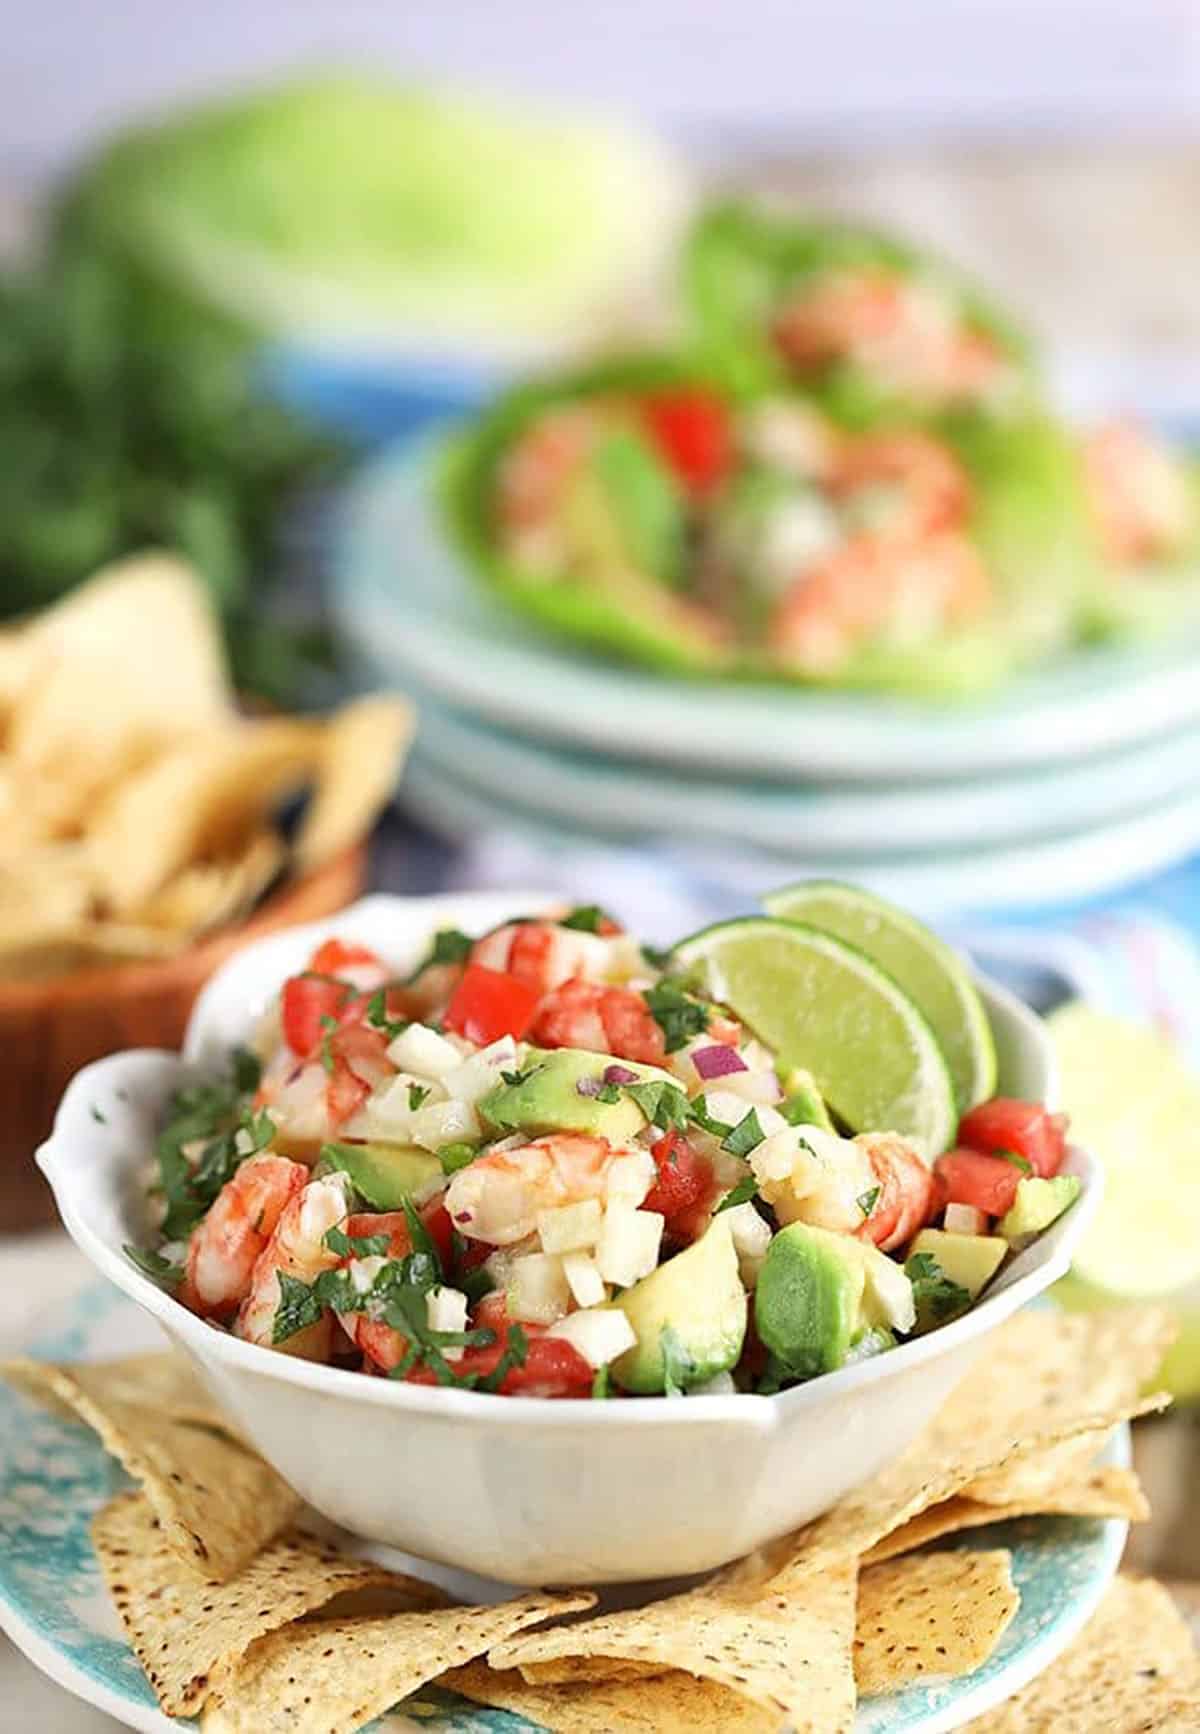 Shrimp ceviche with avocado in a white bowl with chips